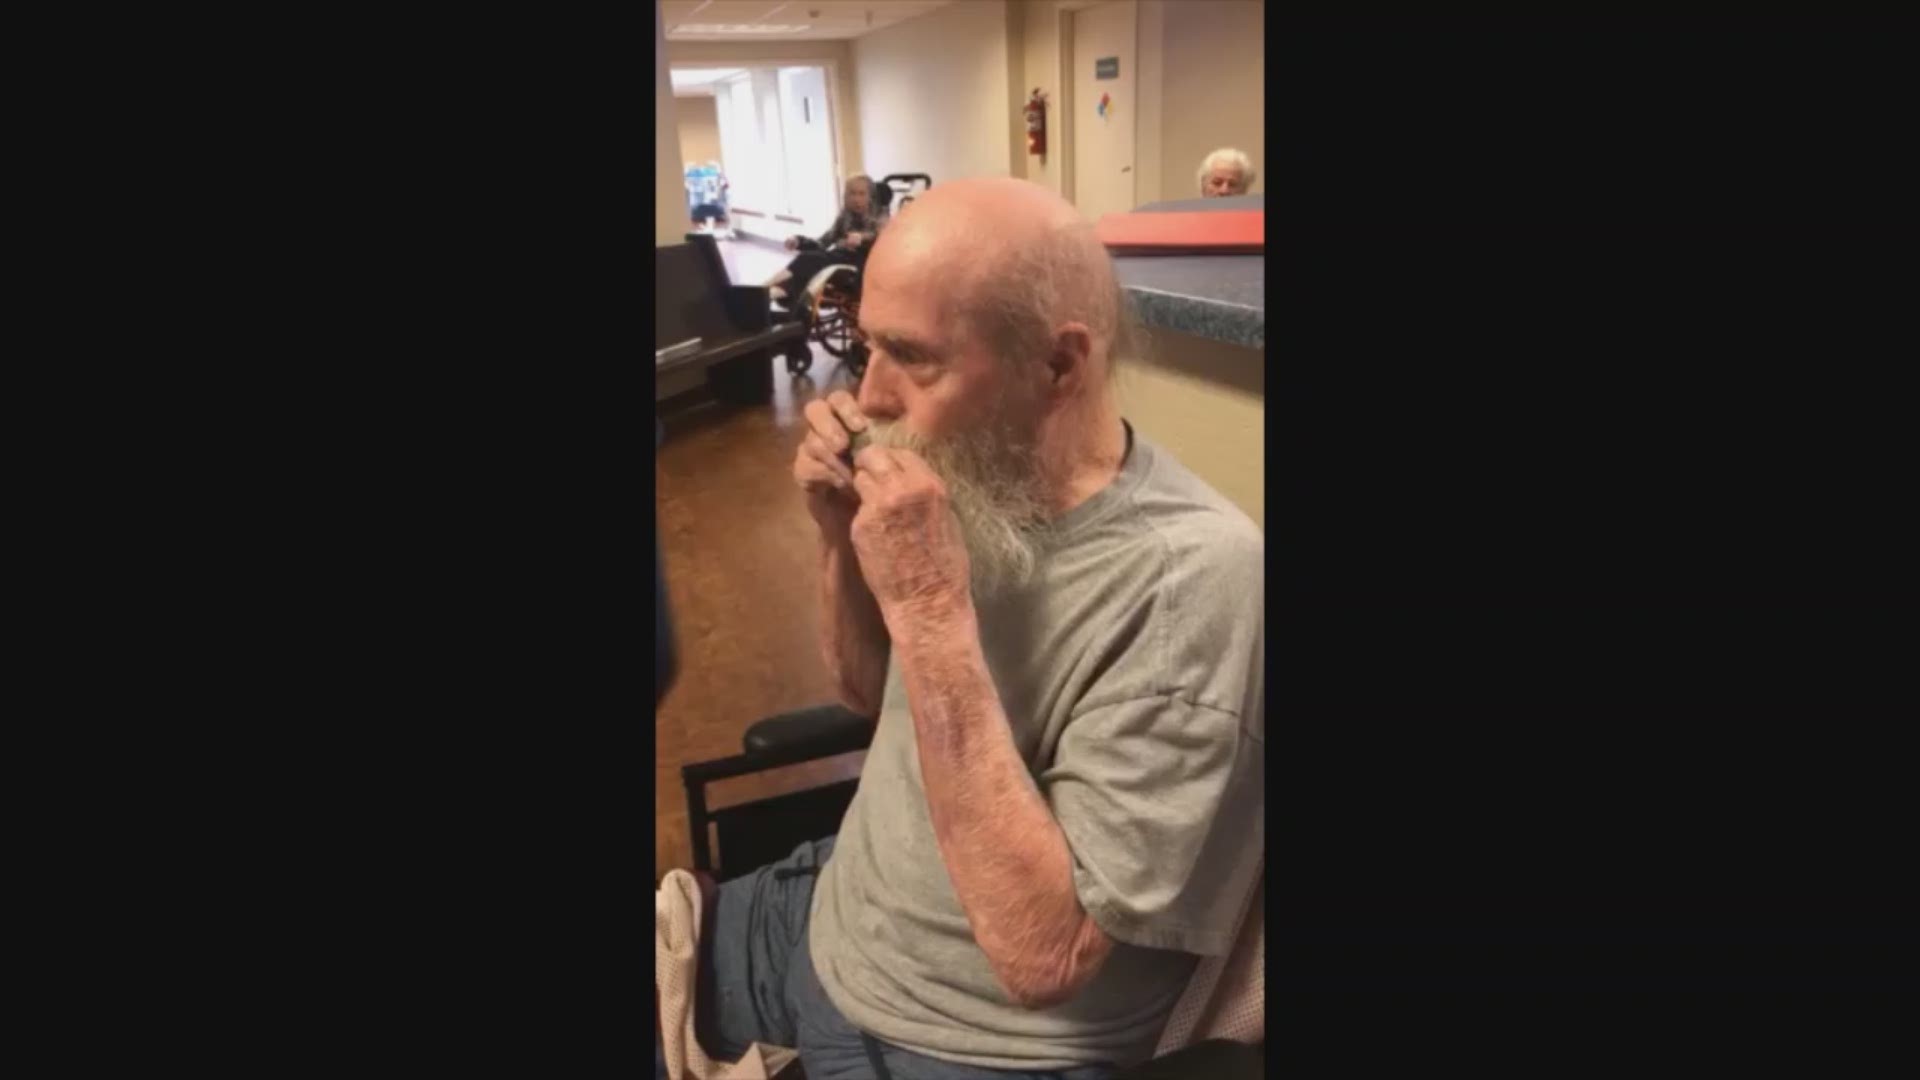 Roger Coe, an Iowan who died from COVID-19, plays the harmonica. Video courtesy of Karen Chiri.